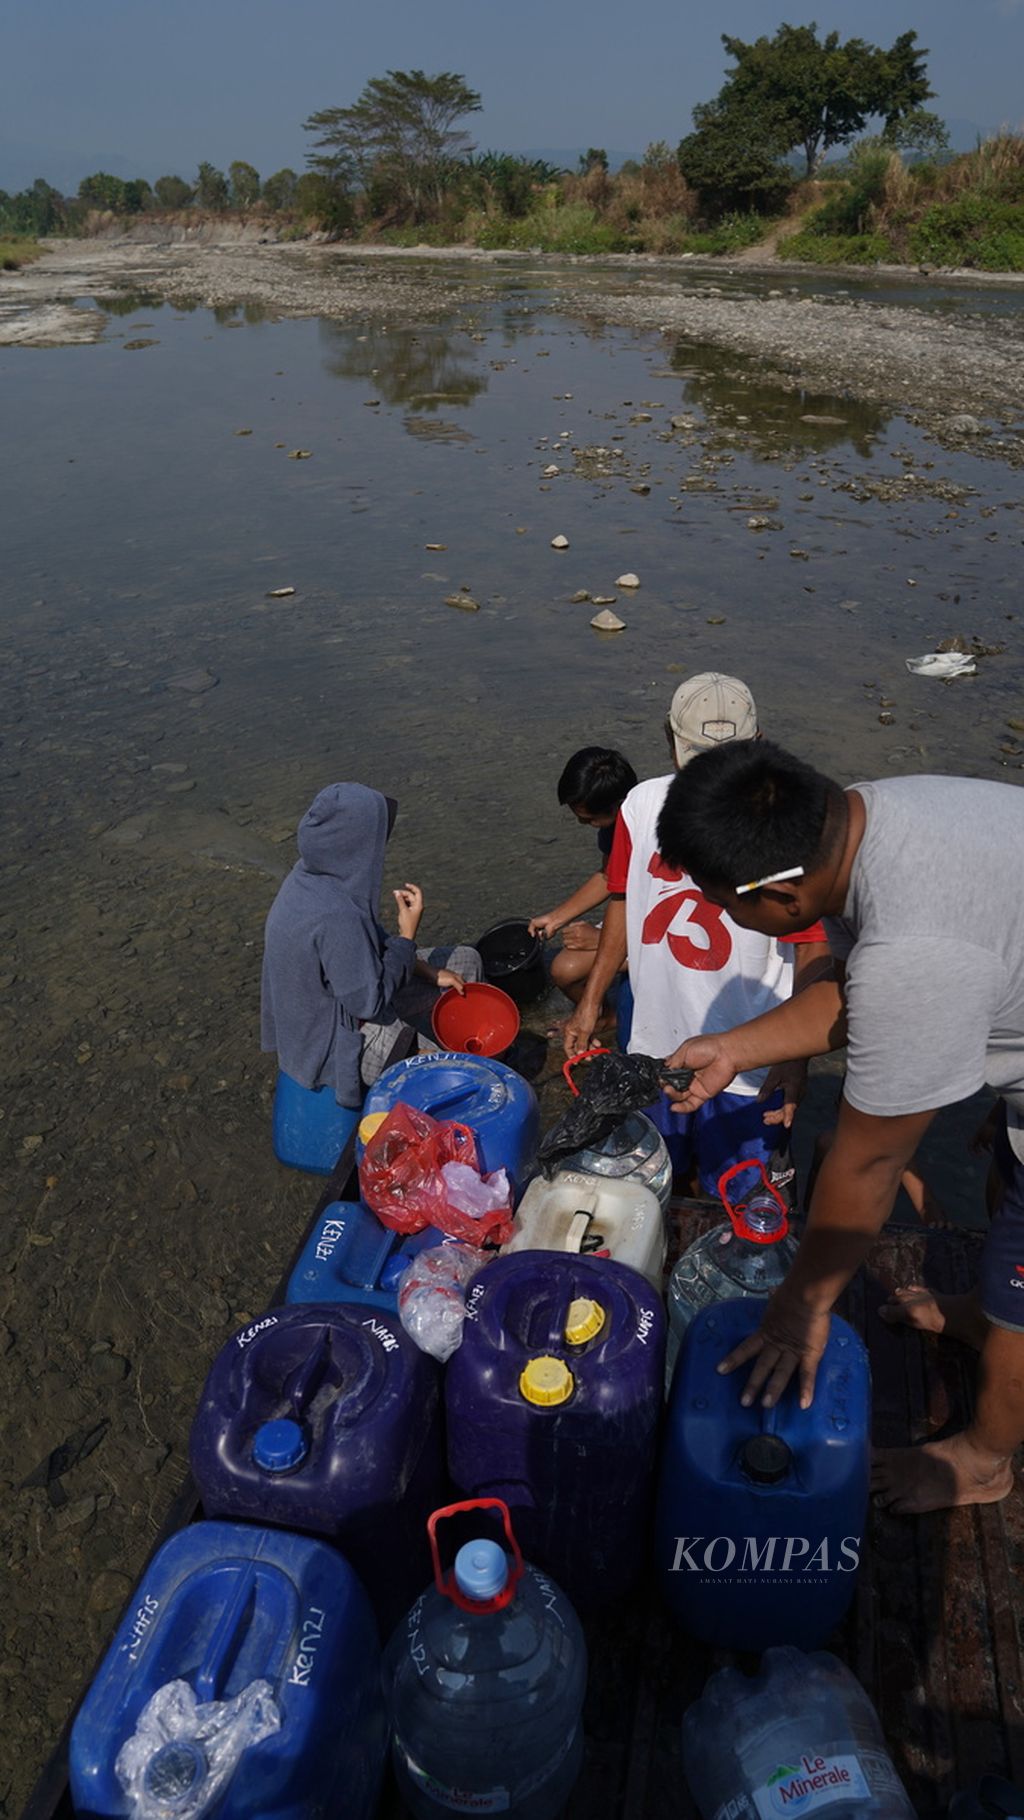 Residents scoop water from the dwindling Cipamingkis River in Balekambang Village, Jonggol, Bogor Regency, West Java (September 16, 2023). Over the past three months, locals have been using the water from the Cipamingkis River for bathing, washing, and cooking.